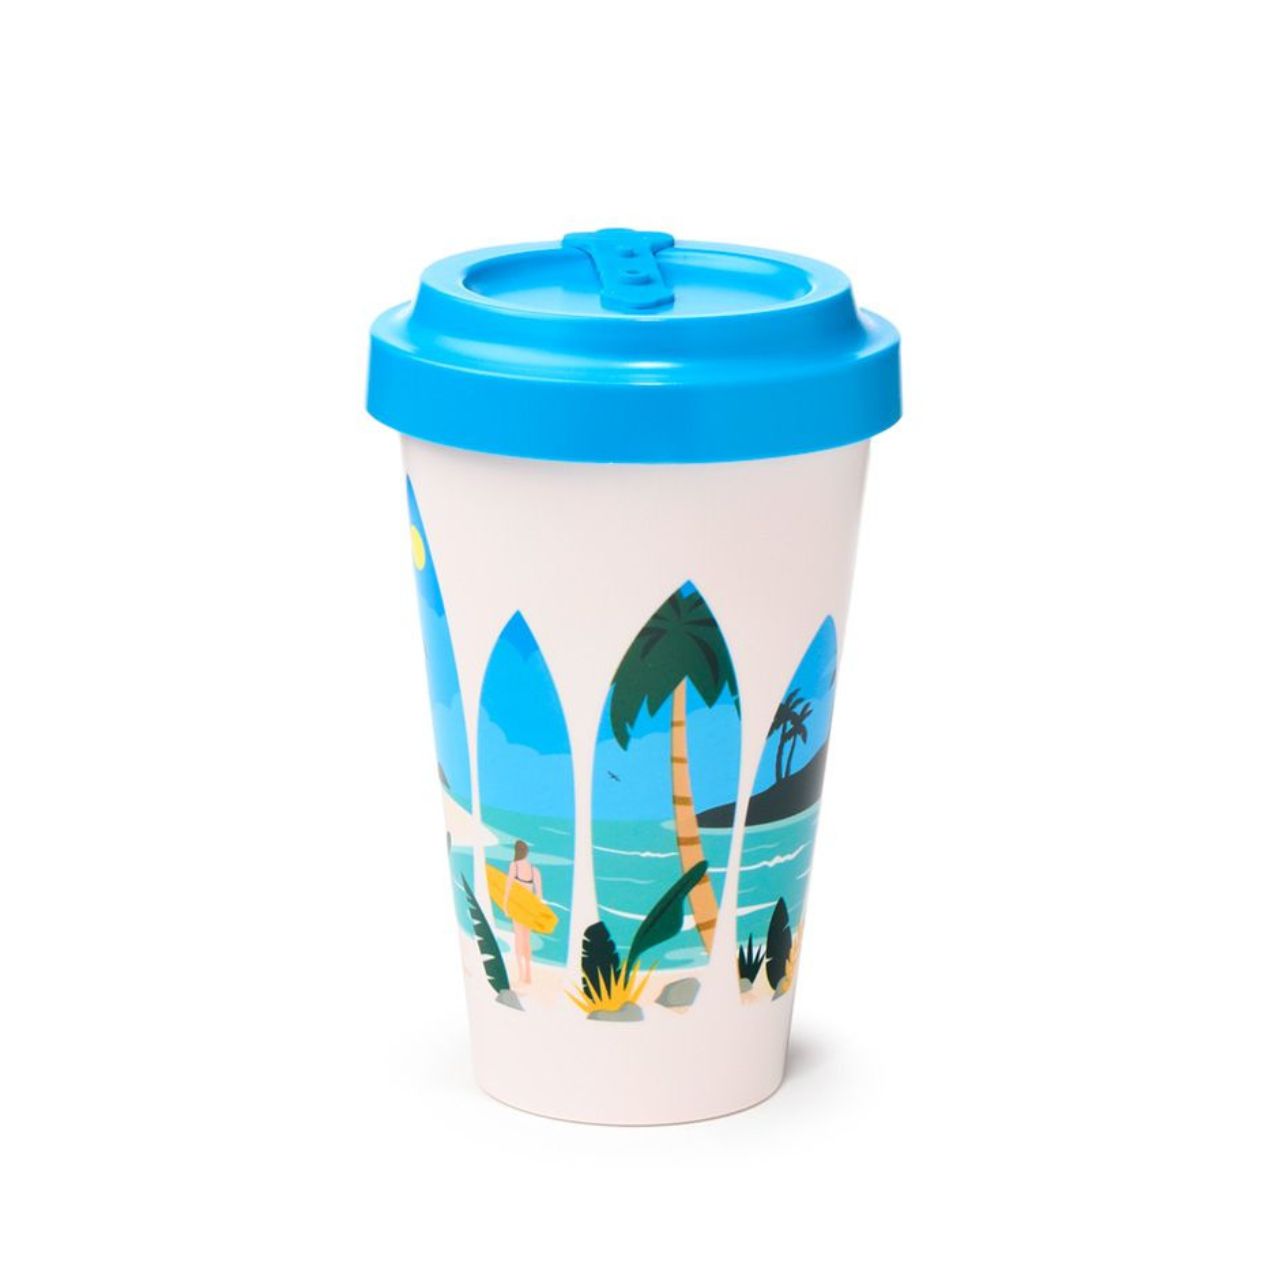 This Volkswagen VW T1 Camper Bus Waves are Calling Travel Mug holds 400ml of your favorite beverage. Its iconic design will transport you to days of carefree travel. Made from durable materials, it is perfect for both adventures and everyday life. Take a sip and hit the road!